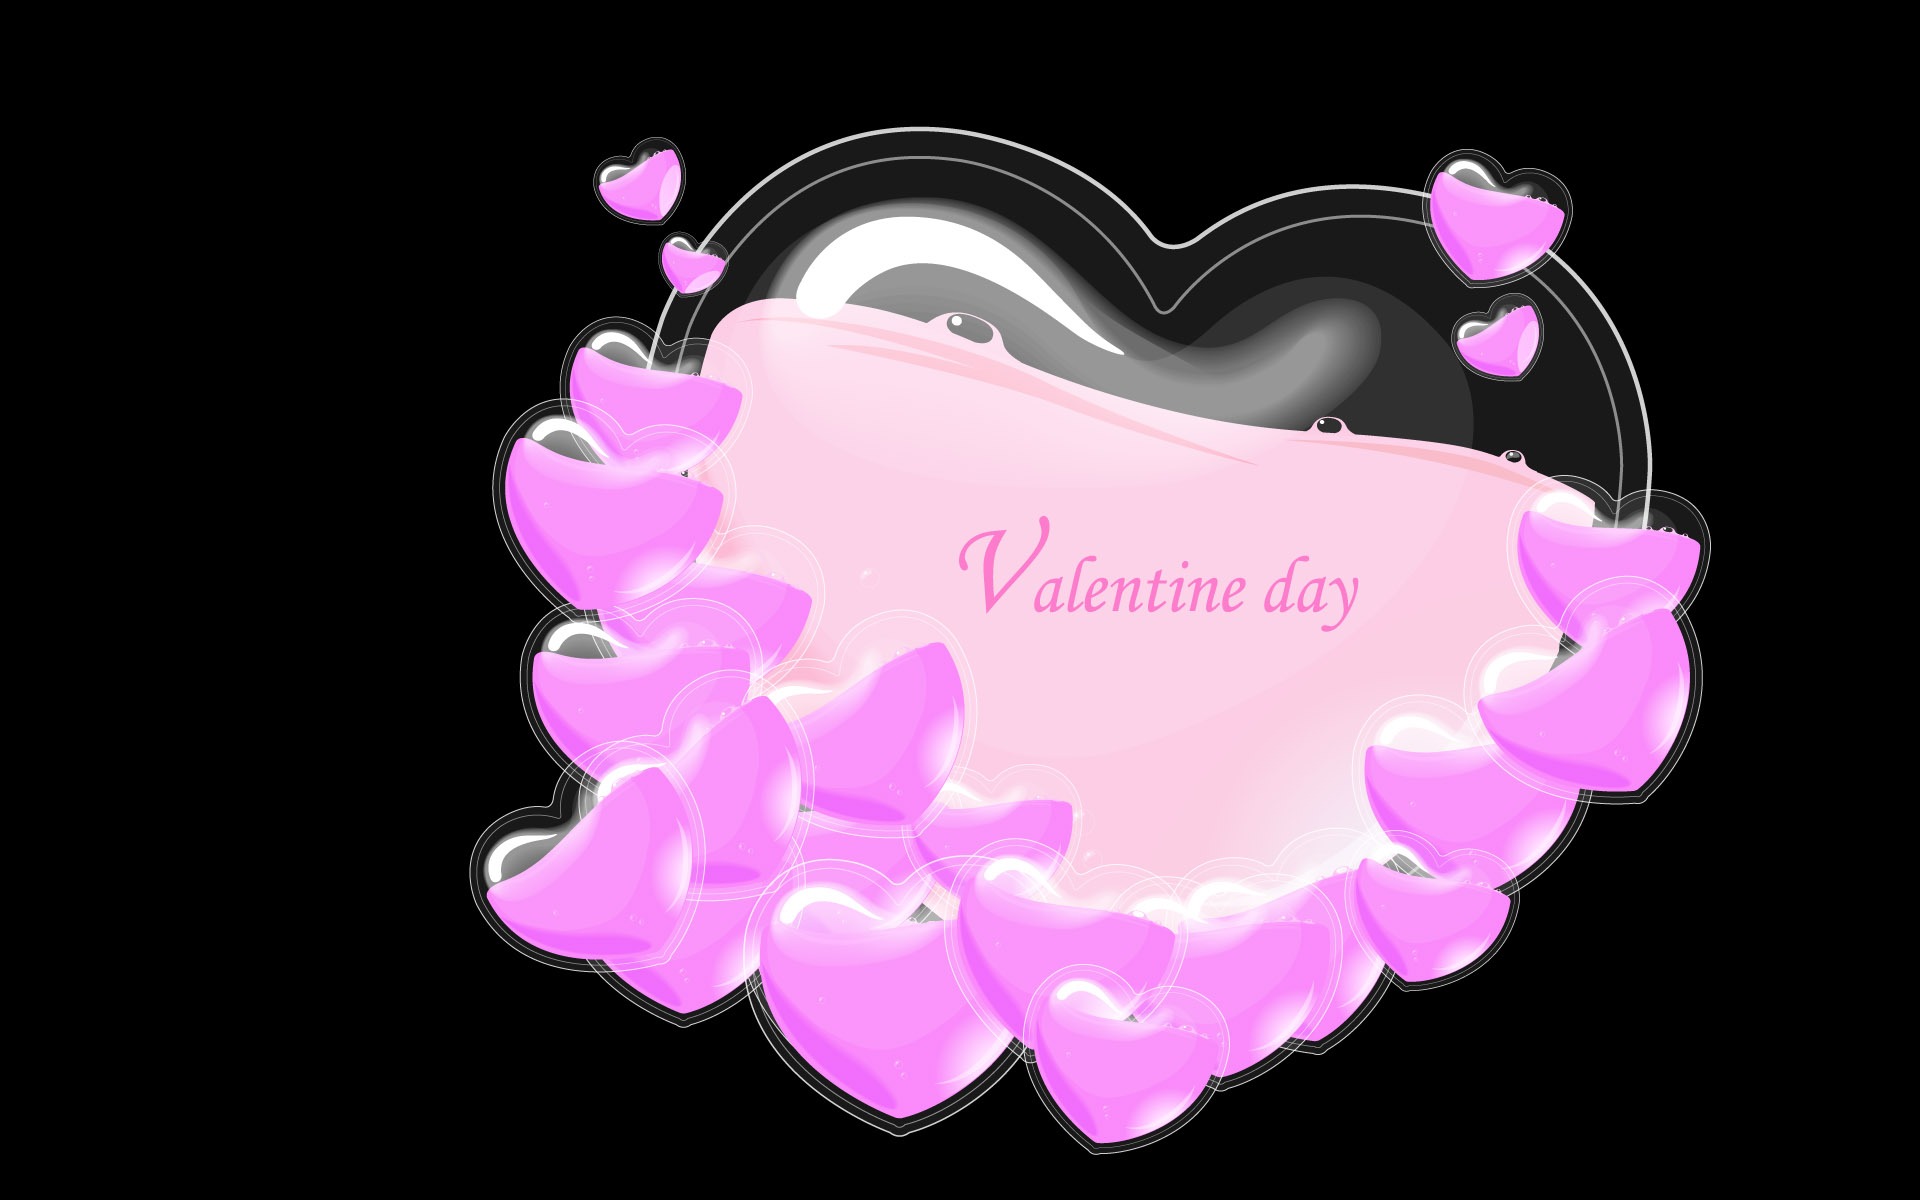 Valentine's Day Theme Wallpapers (2) #8 - 1920x1200